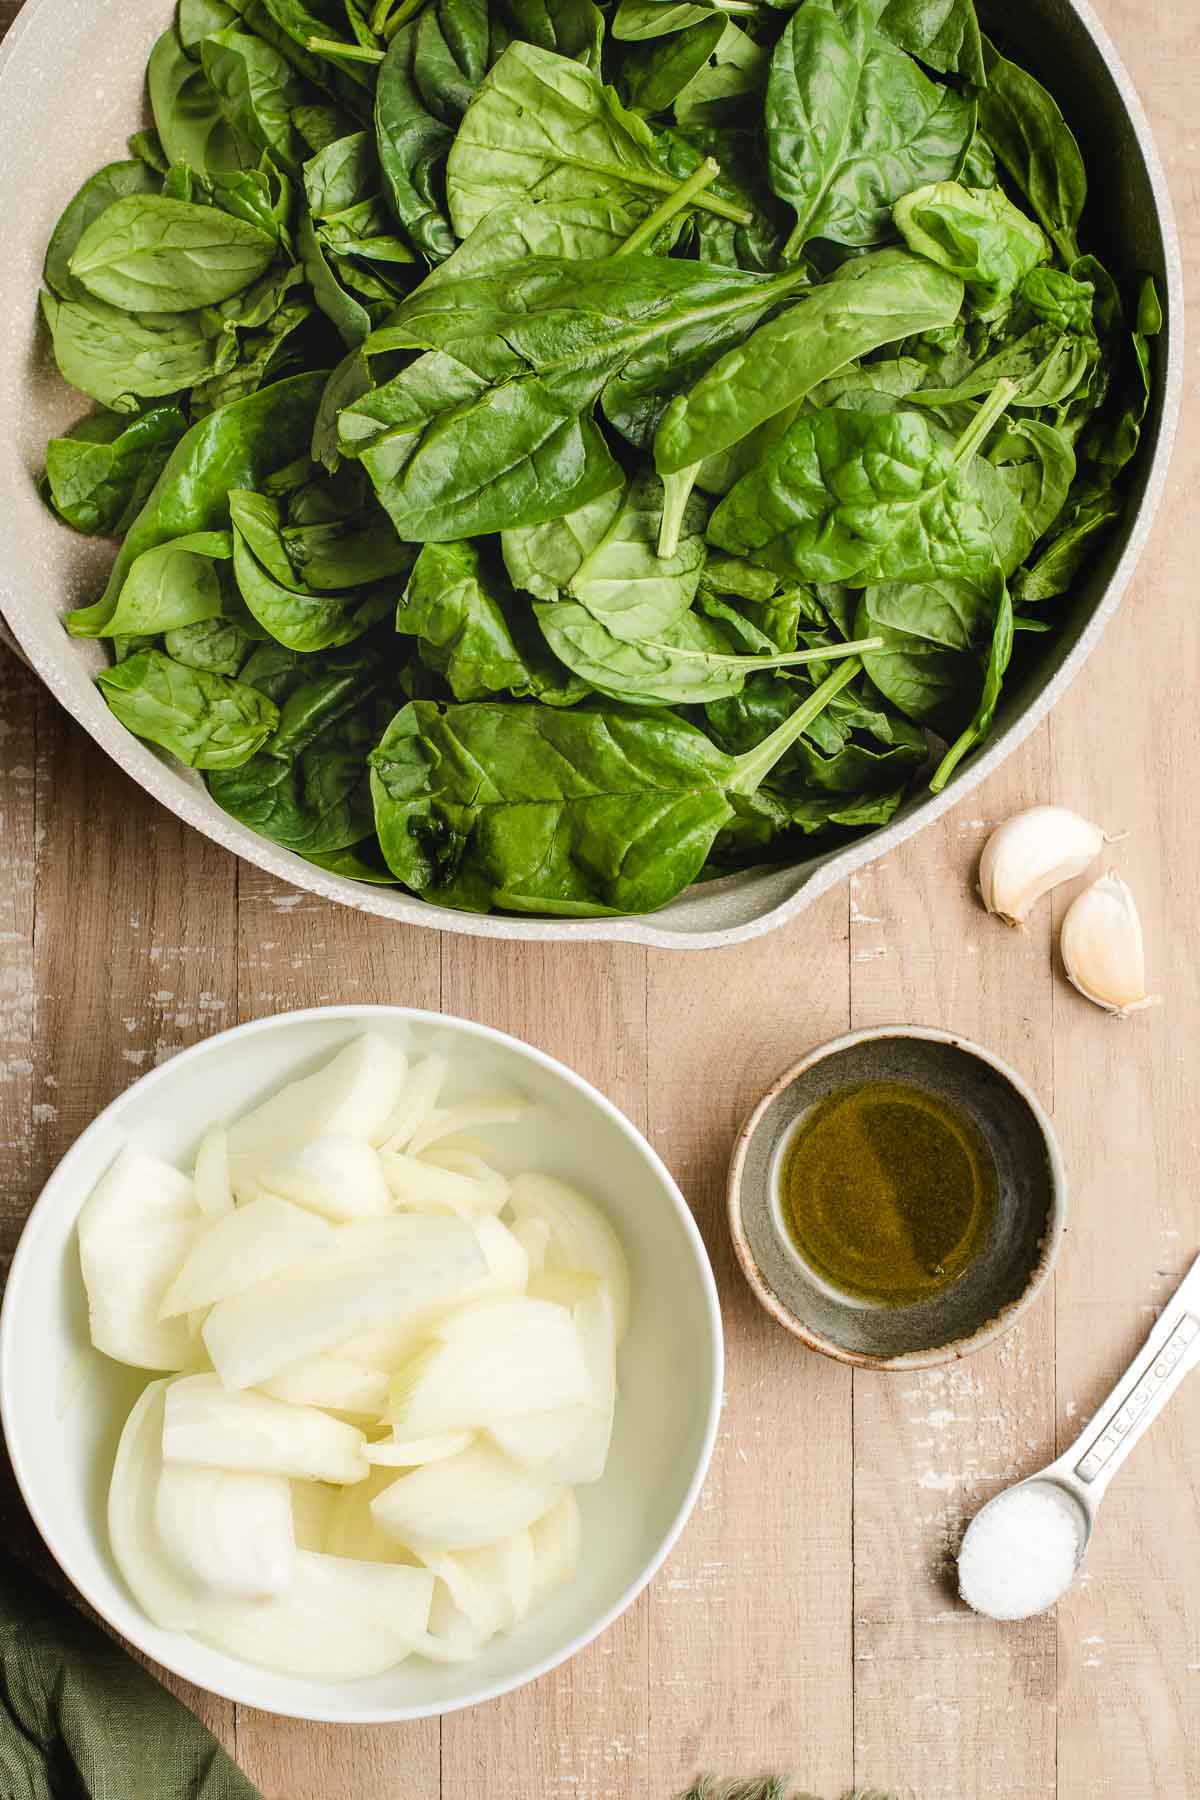 Skillet filled with raw spinach leaves, plu s a bowl of sliced onions, olive oil, salt, and garlic.